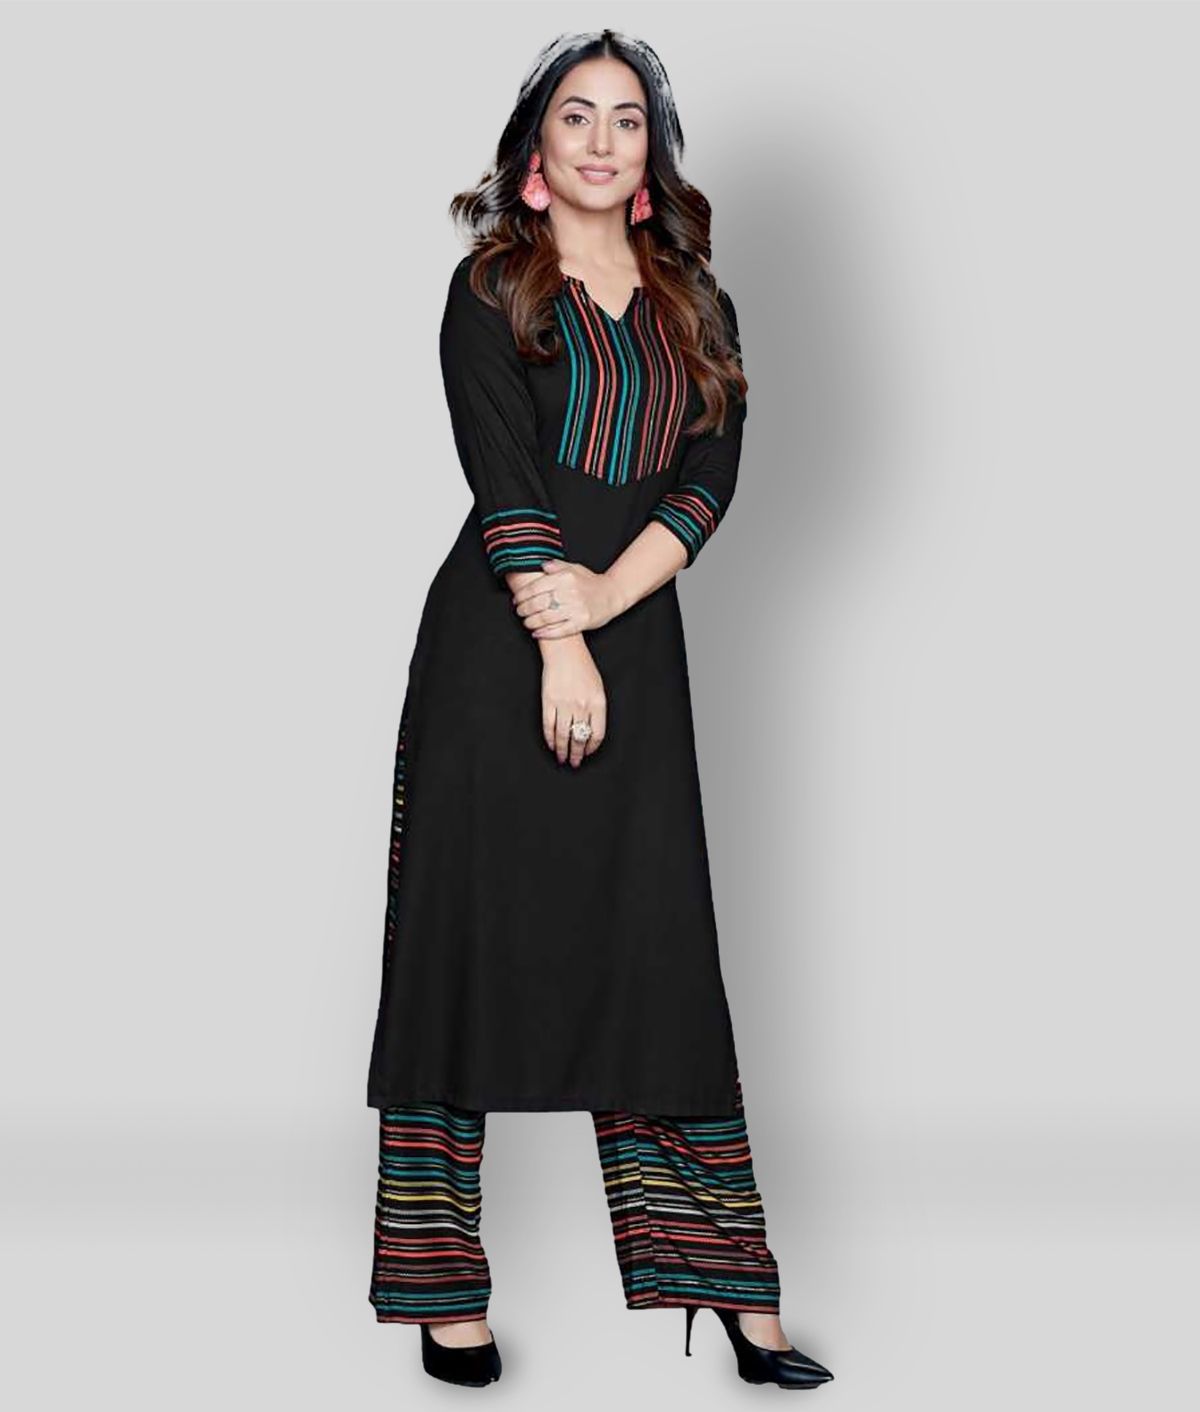 Estela - Black Straight Rayon Women's Stitched Salwar Suit ( Pack of 1 )